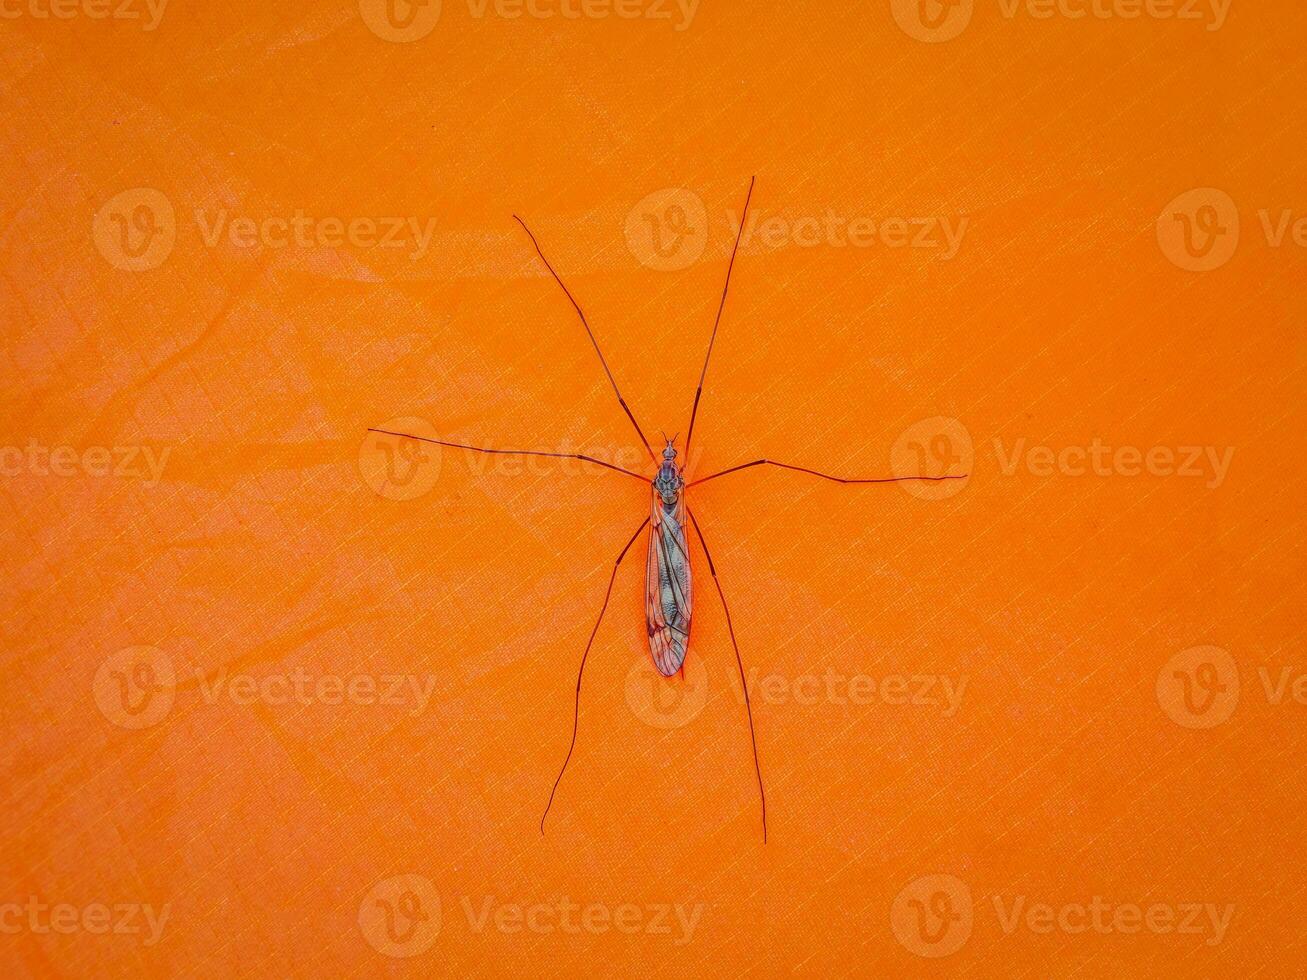 Big mosquito are sitting on an orange tent. Close-up. photo